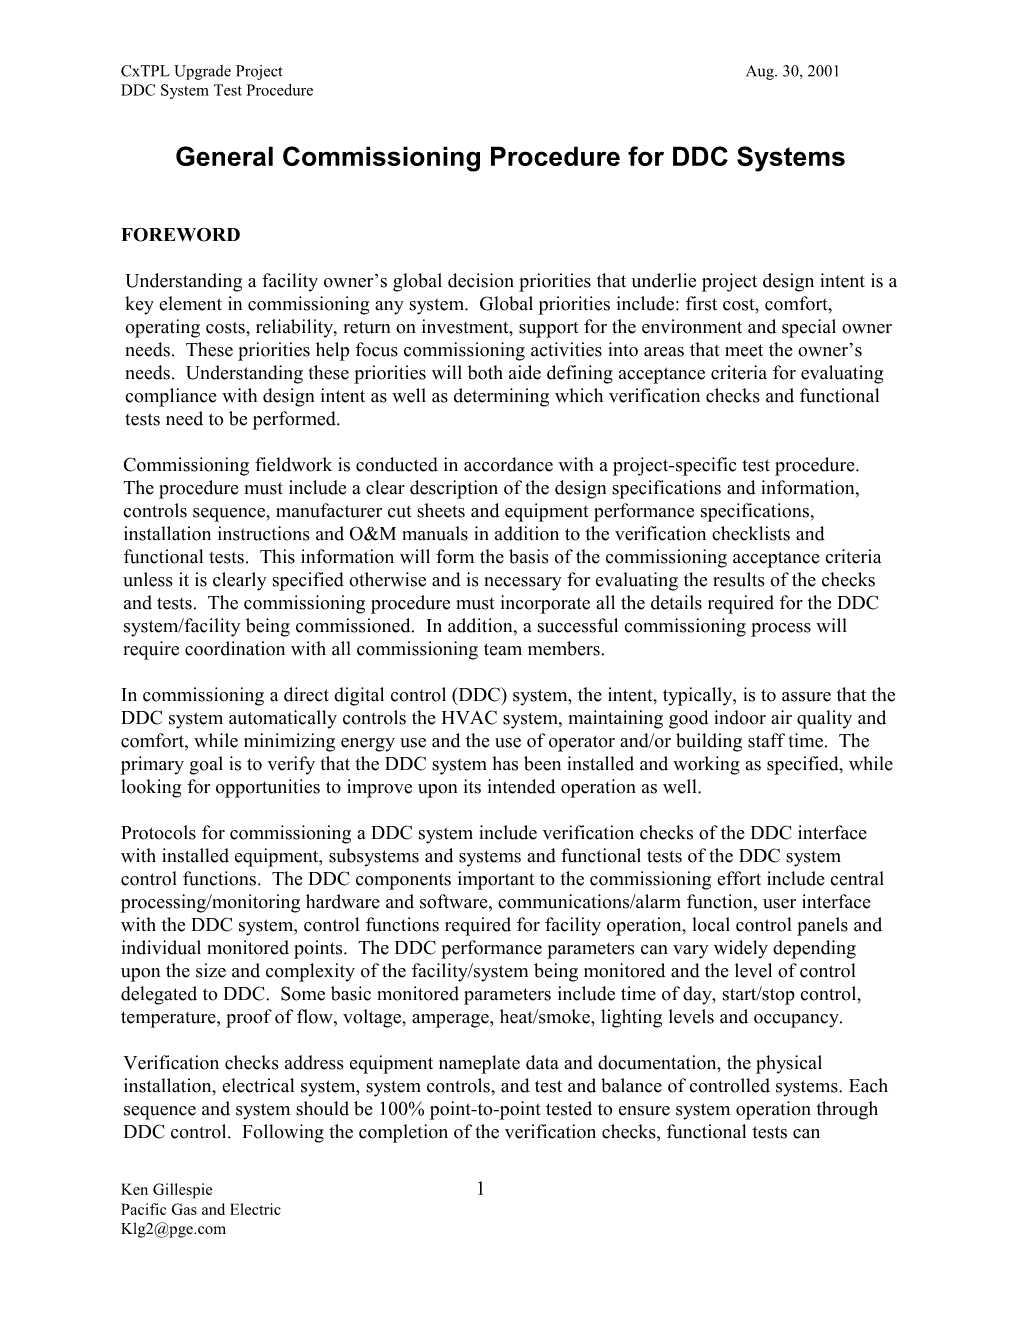 Commissioning Test Protocol For DDC Systems